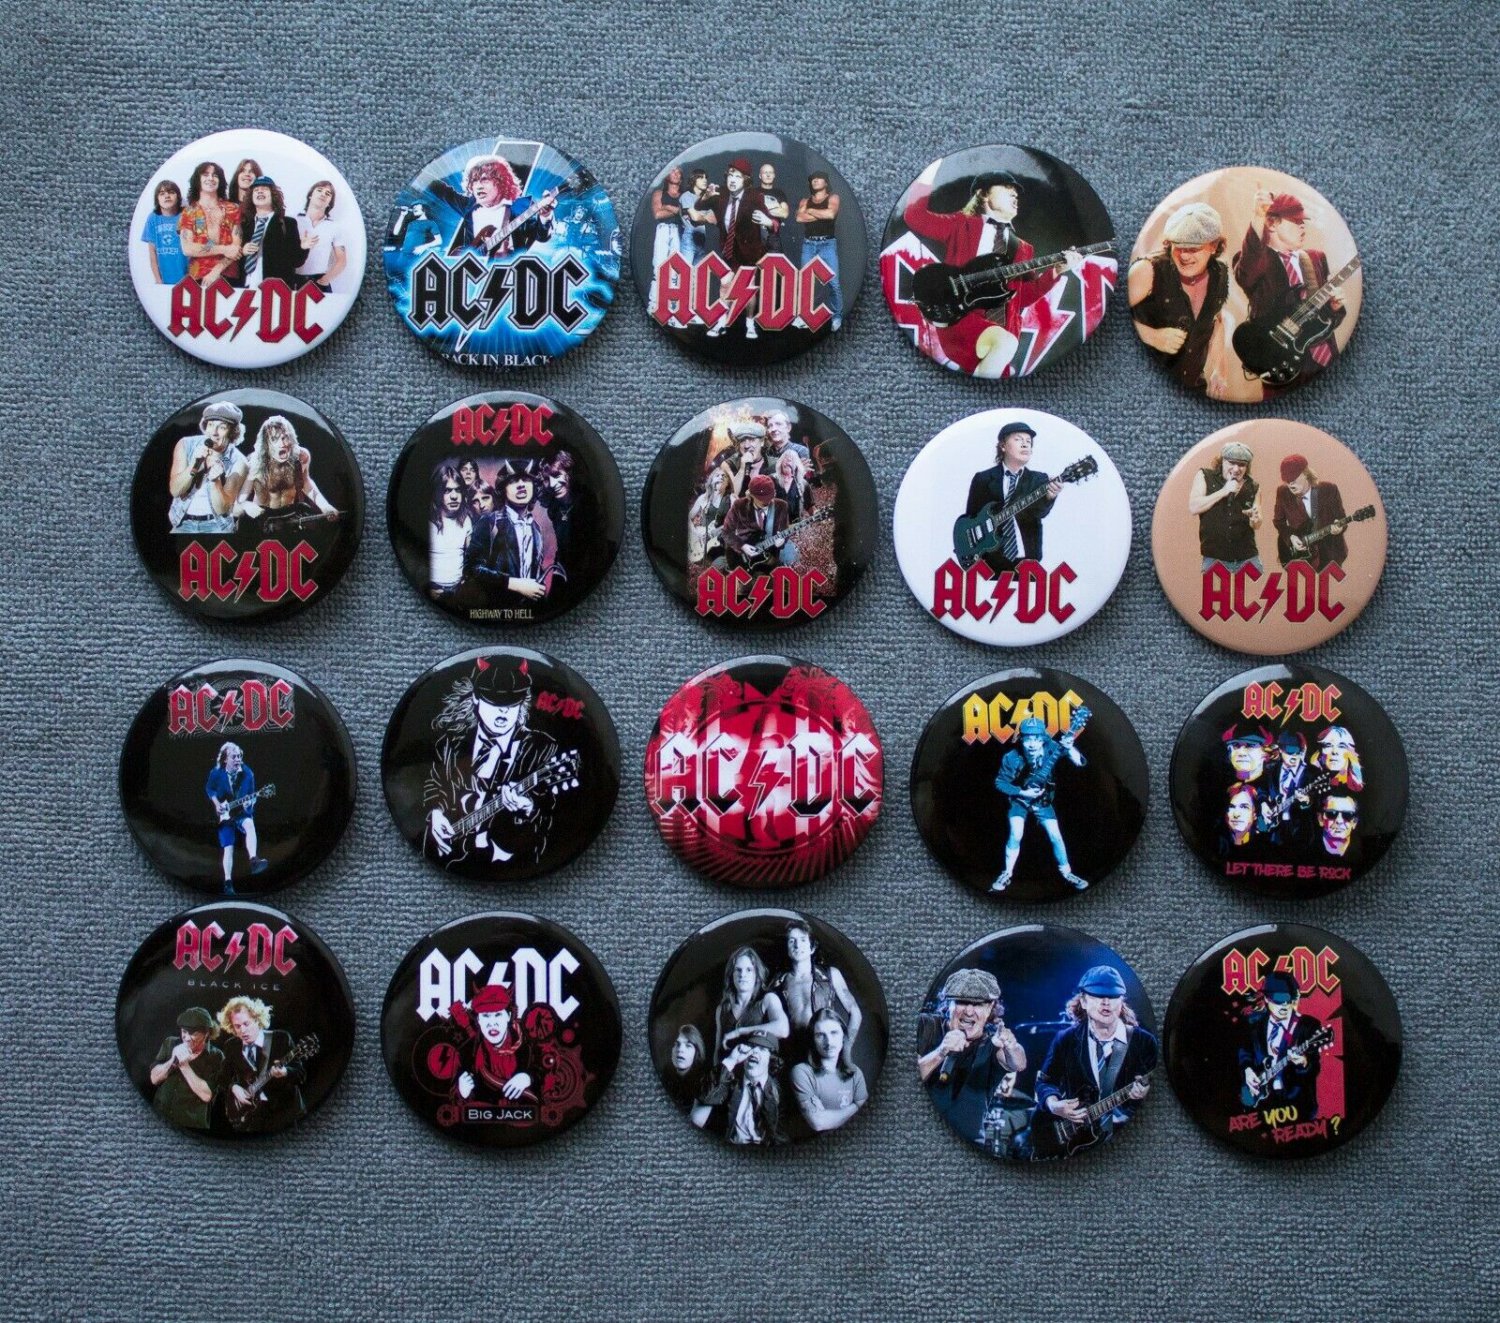 Refrigerator magnets rock band AC DC a set of 20 pieces.